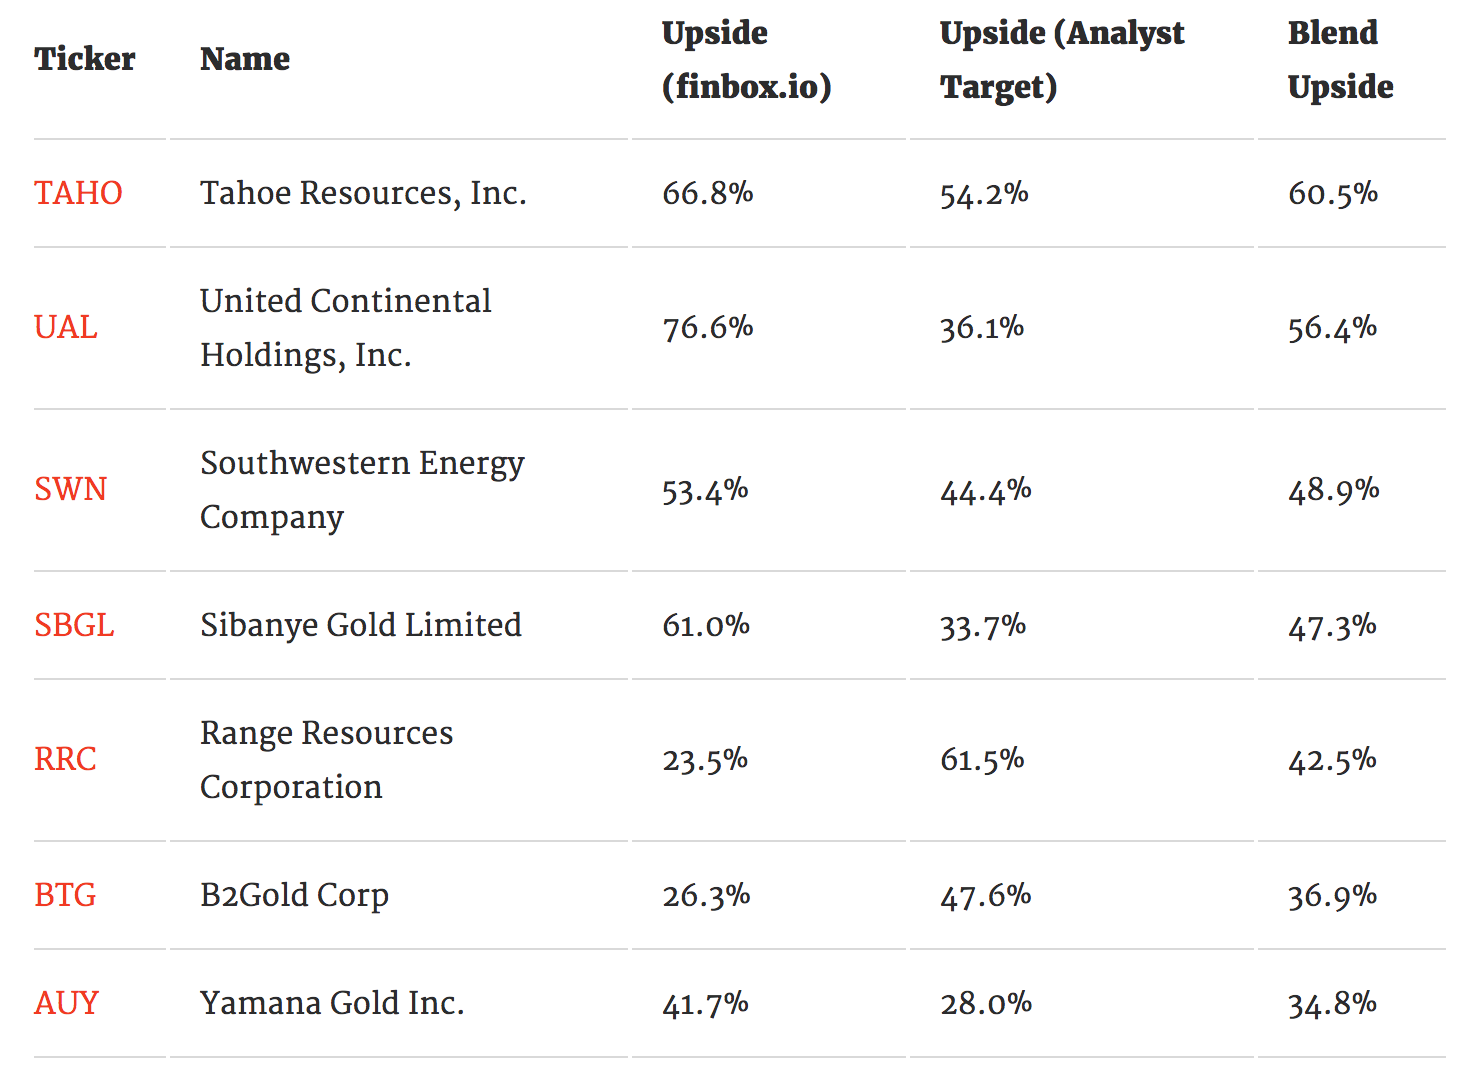 Ray Dalio’s Principles And Top 7 Most Undervalued Stock Holdings